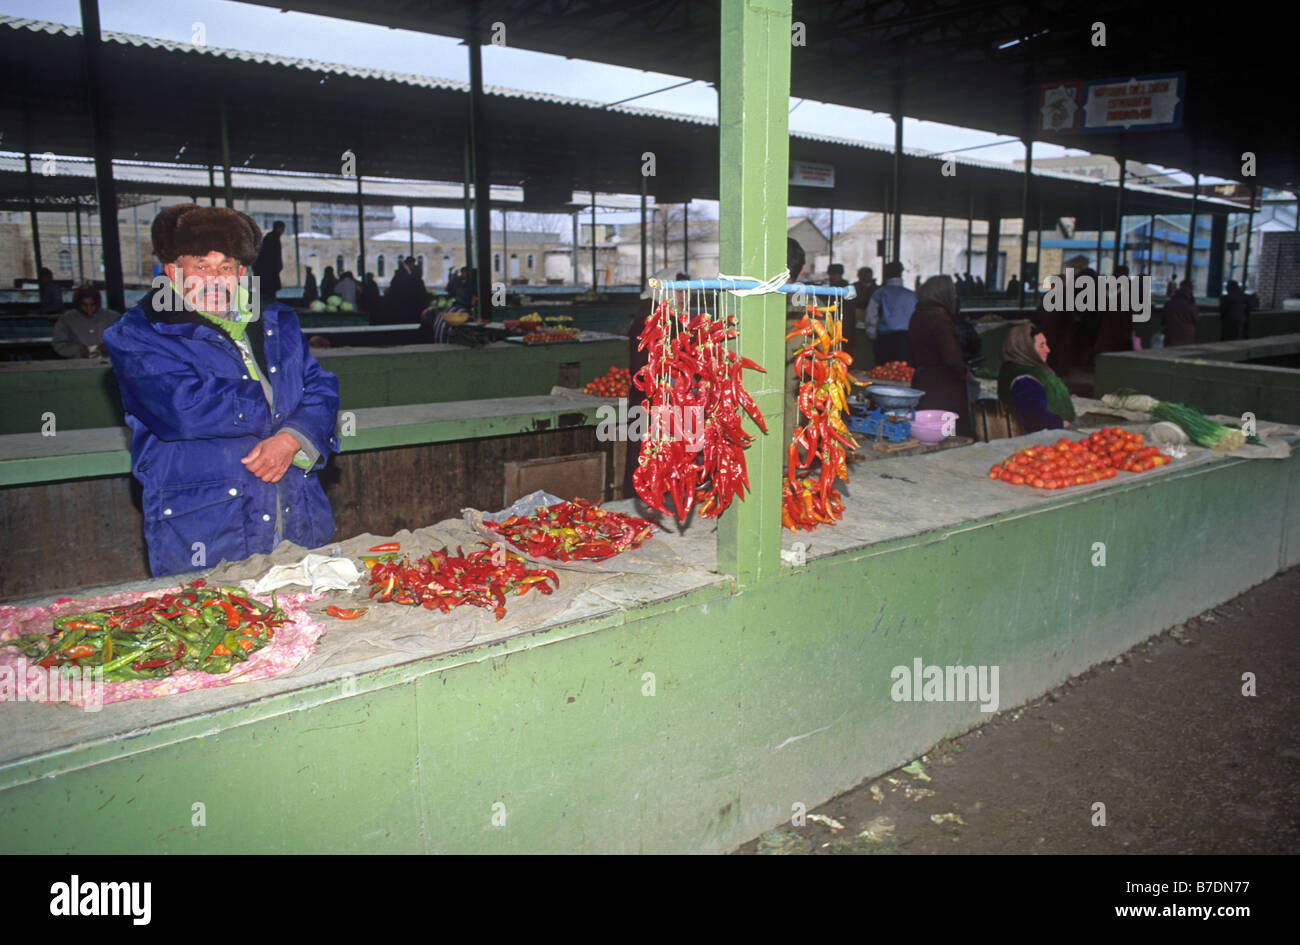 Man in fur hat selling chilli peppers and a few onions in Urgench bazaar near Khiva Uzbekistan Asia Stock Photo